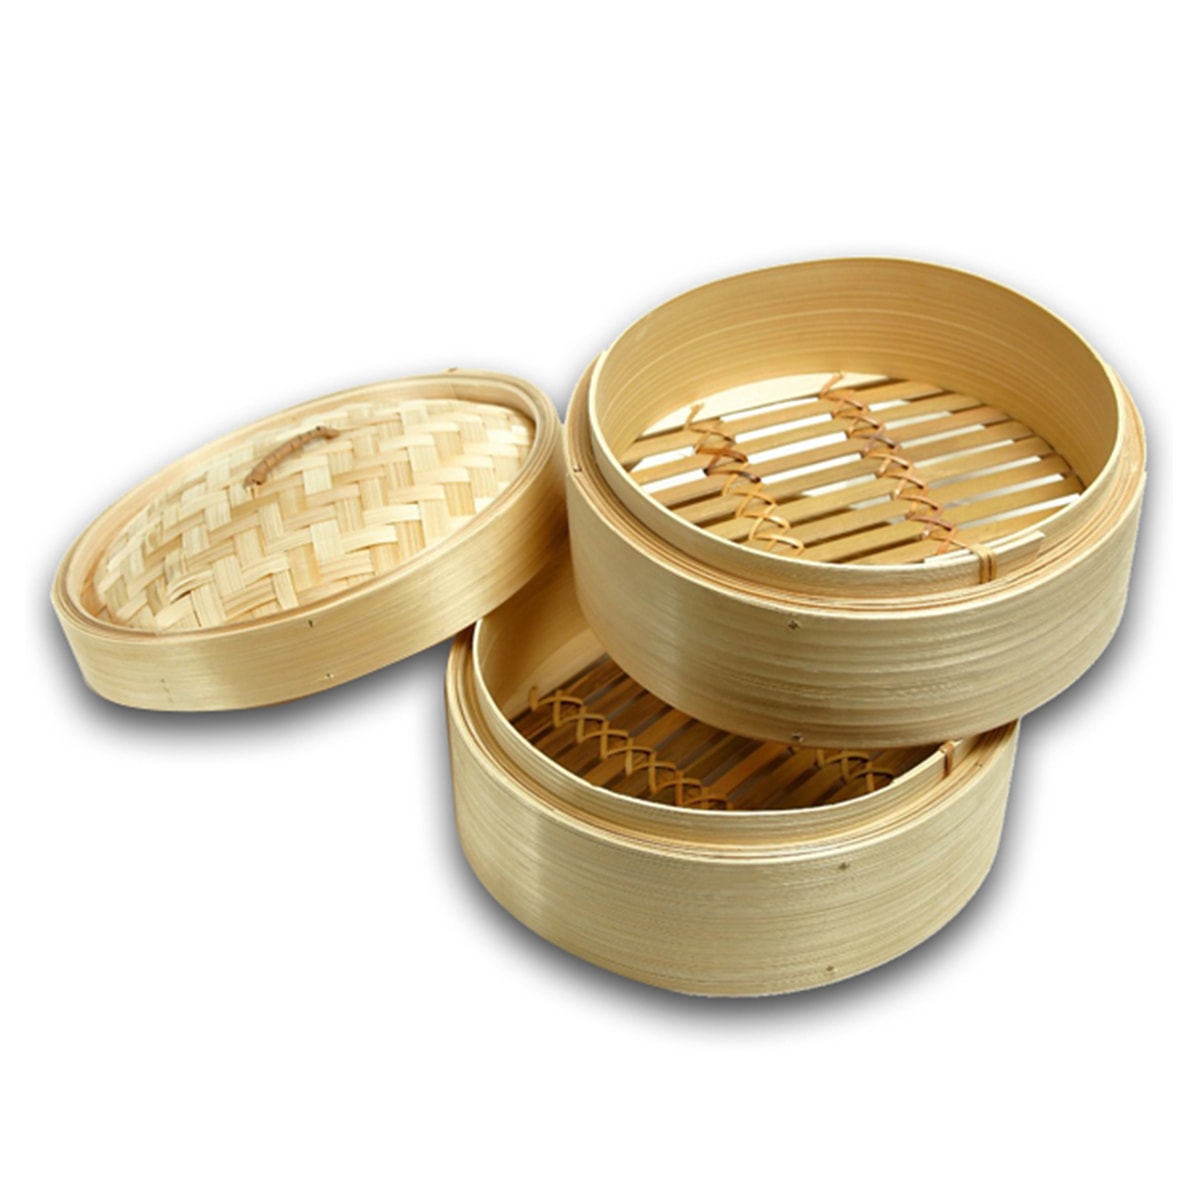 Buy IAG Products Bamboo Steamer (1 Lid and 2 Base) - 10 inch